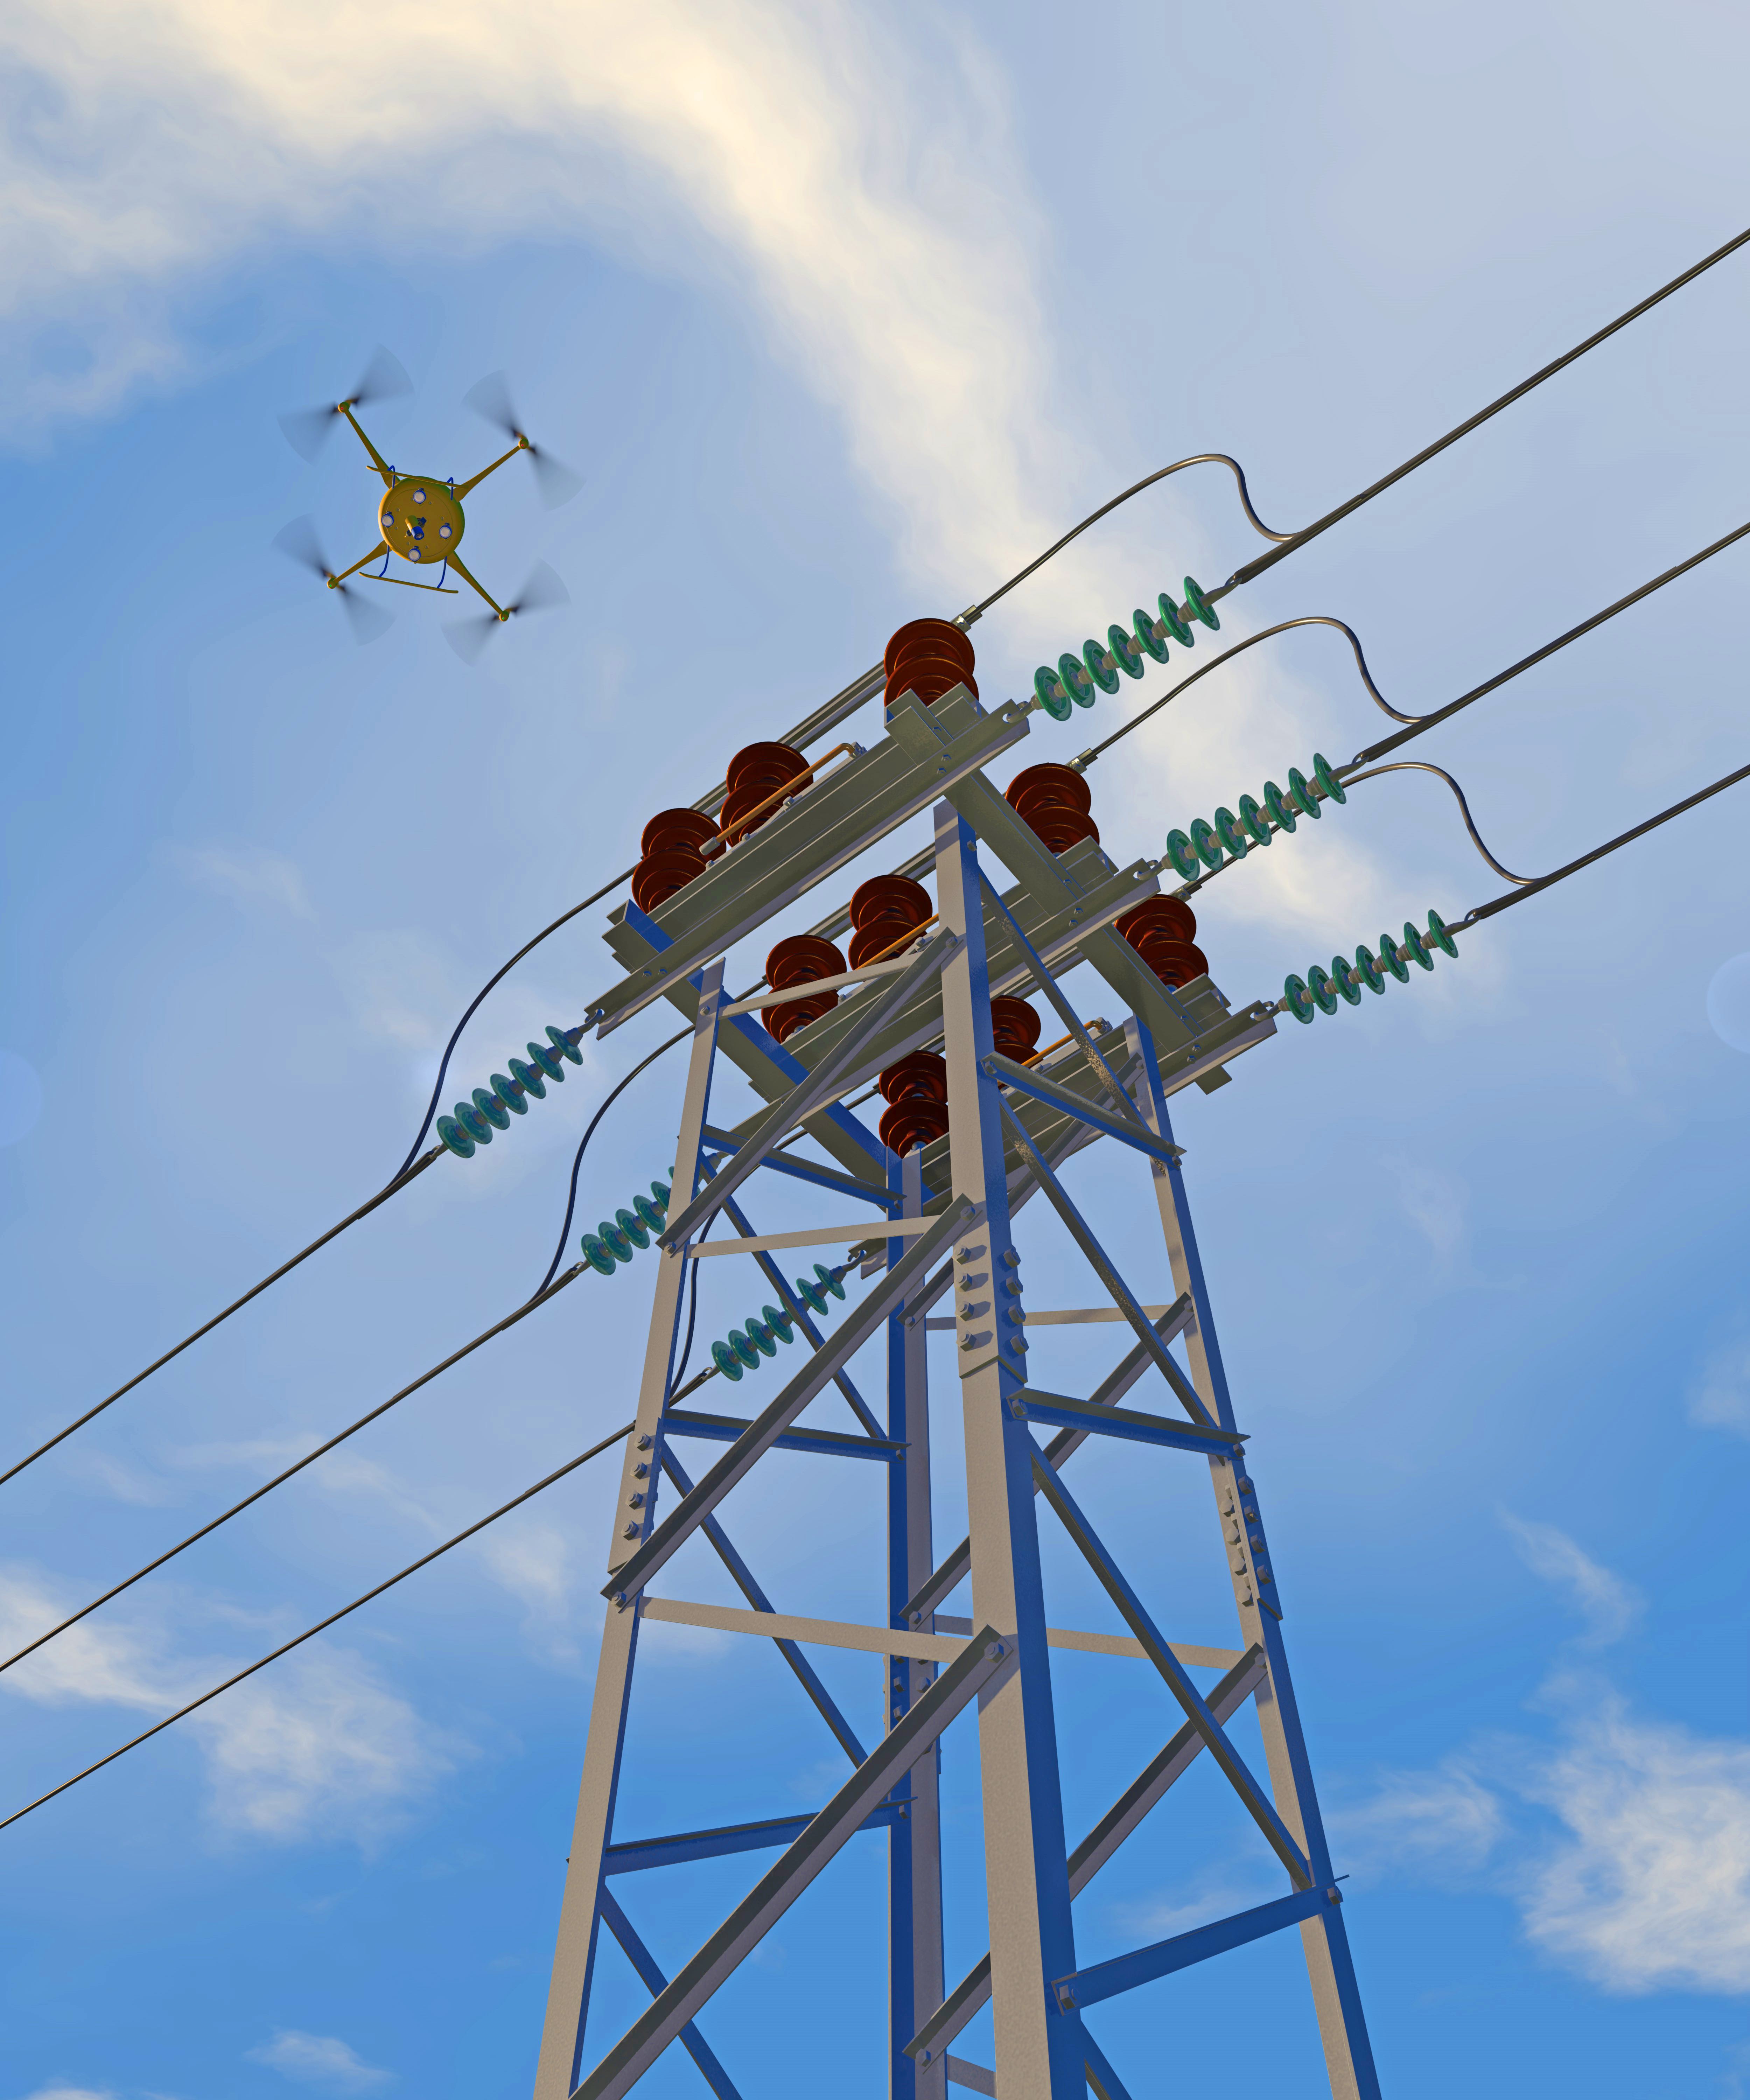 New Unmanned Aircraft Systems Solution for Energy Industry